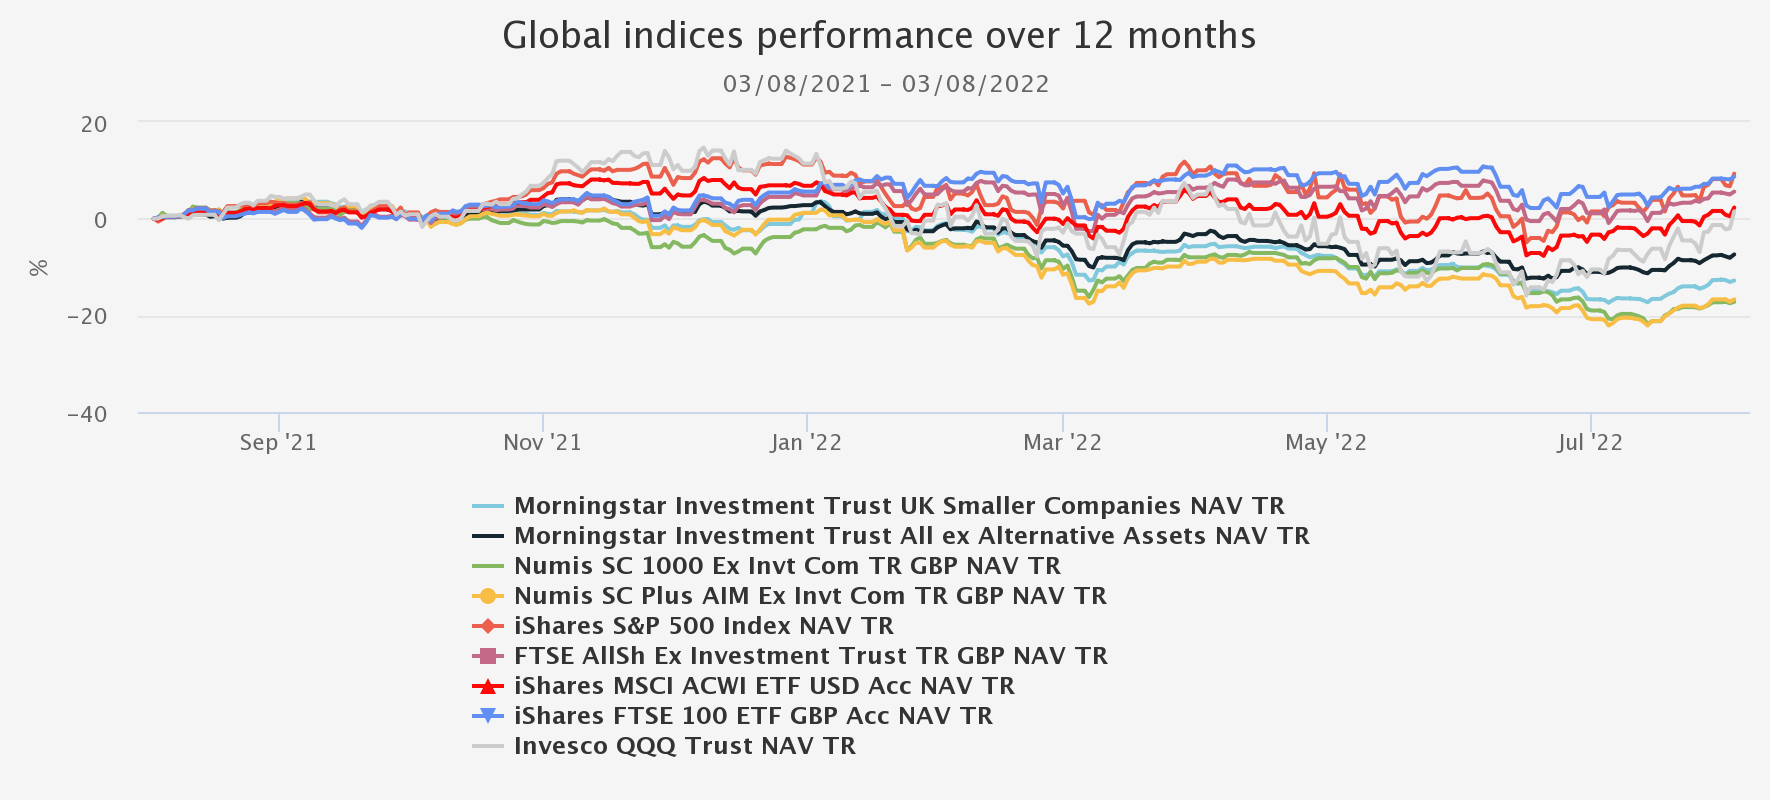 Global indices performance over 12 months